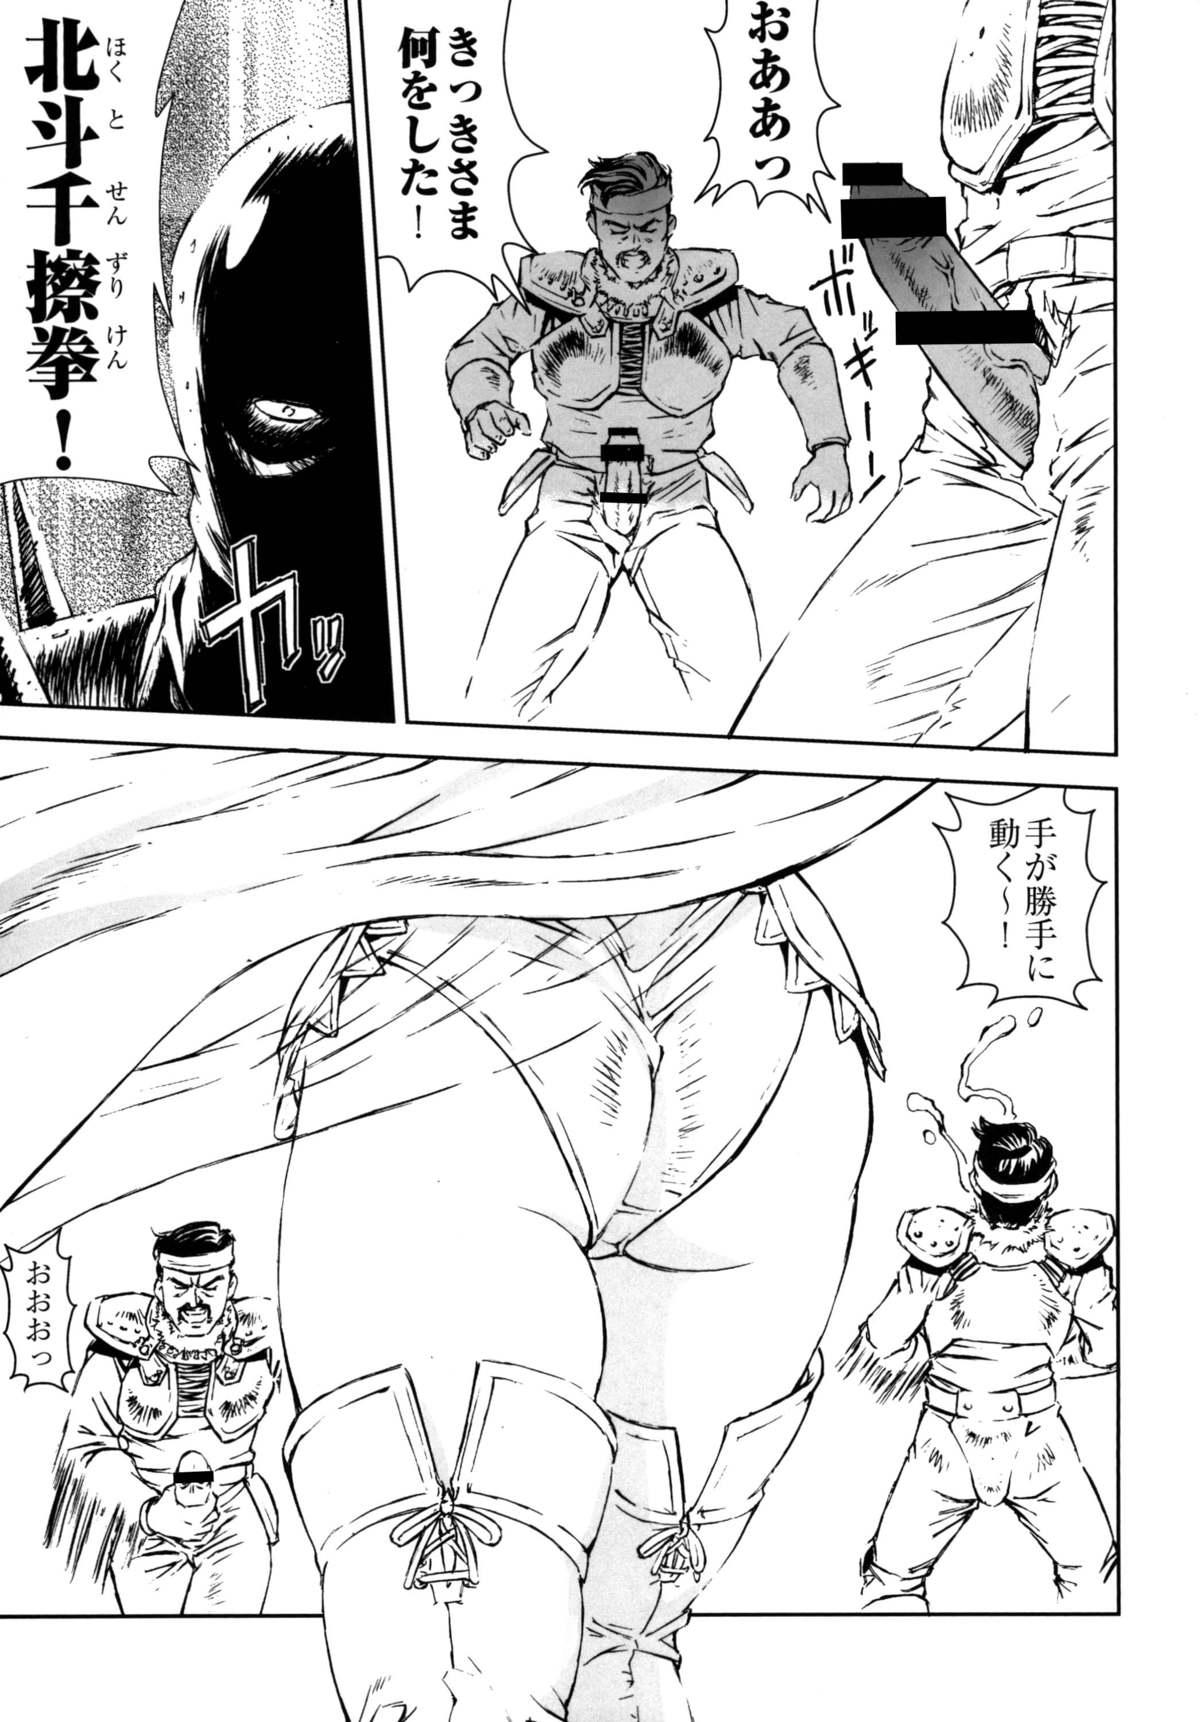 Mamadas HOT BITCH JUMP 2 - Kochikame Fist of the north star Huge Dick - Page 6